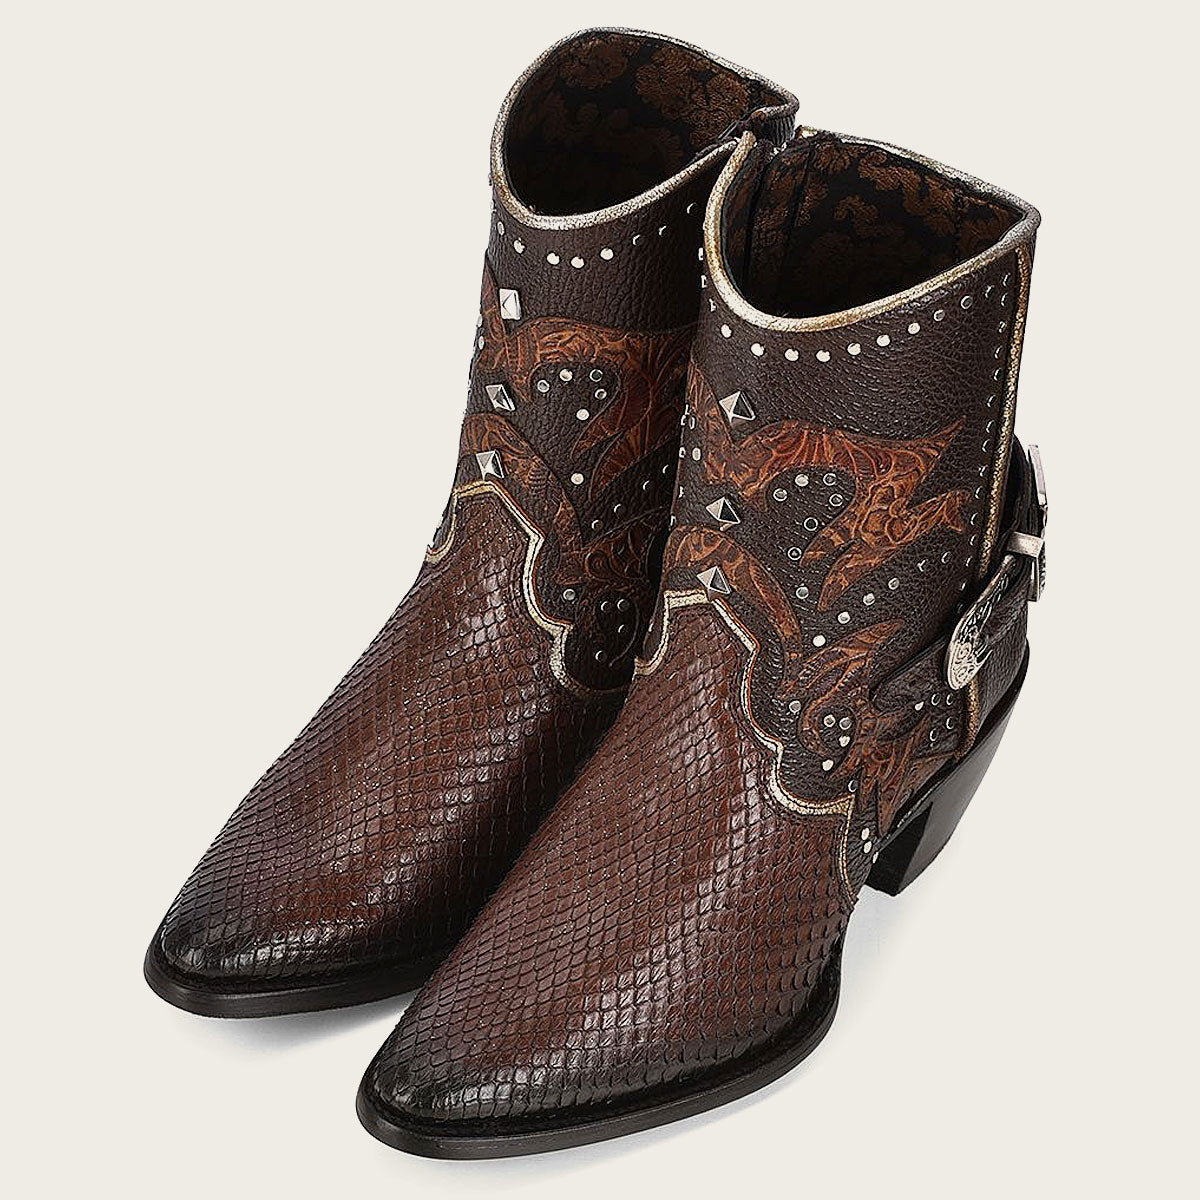 Brown western exotic leather bootie, made from premium quality leather. Unique texture and pattern, with classic design and modern detailing.